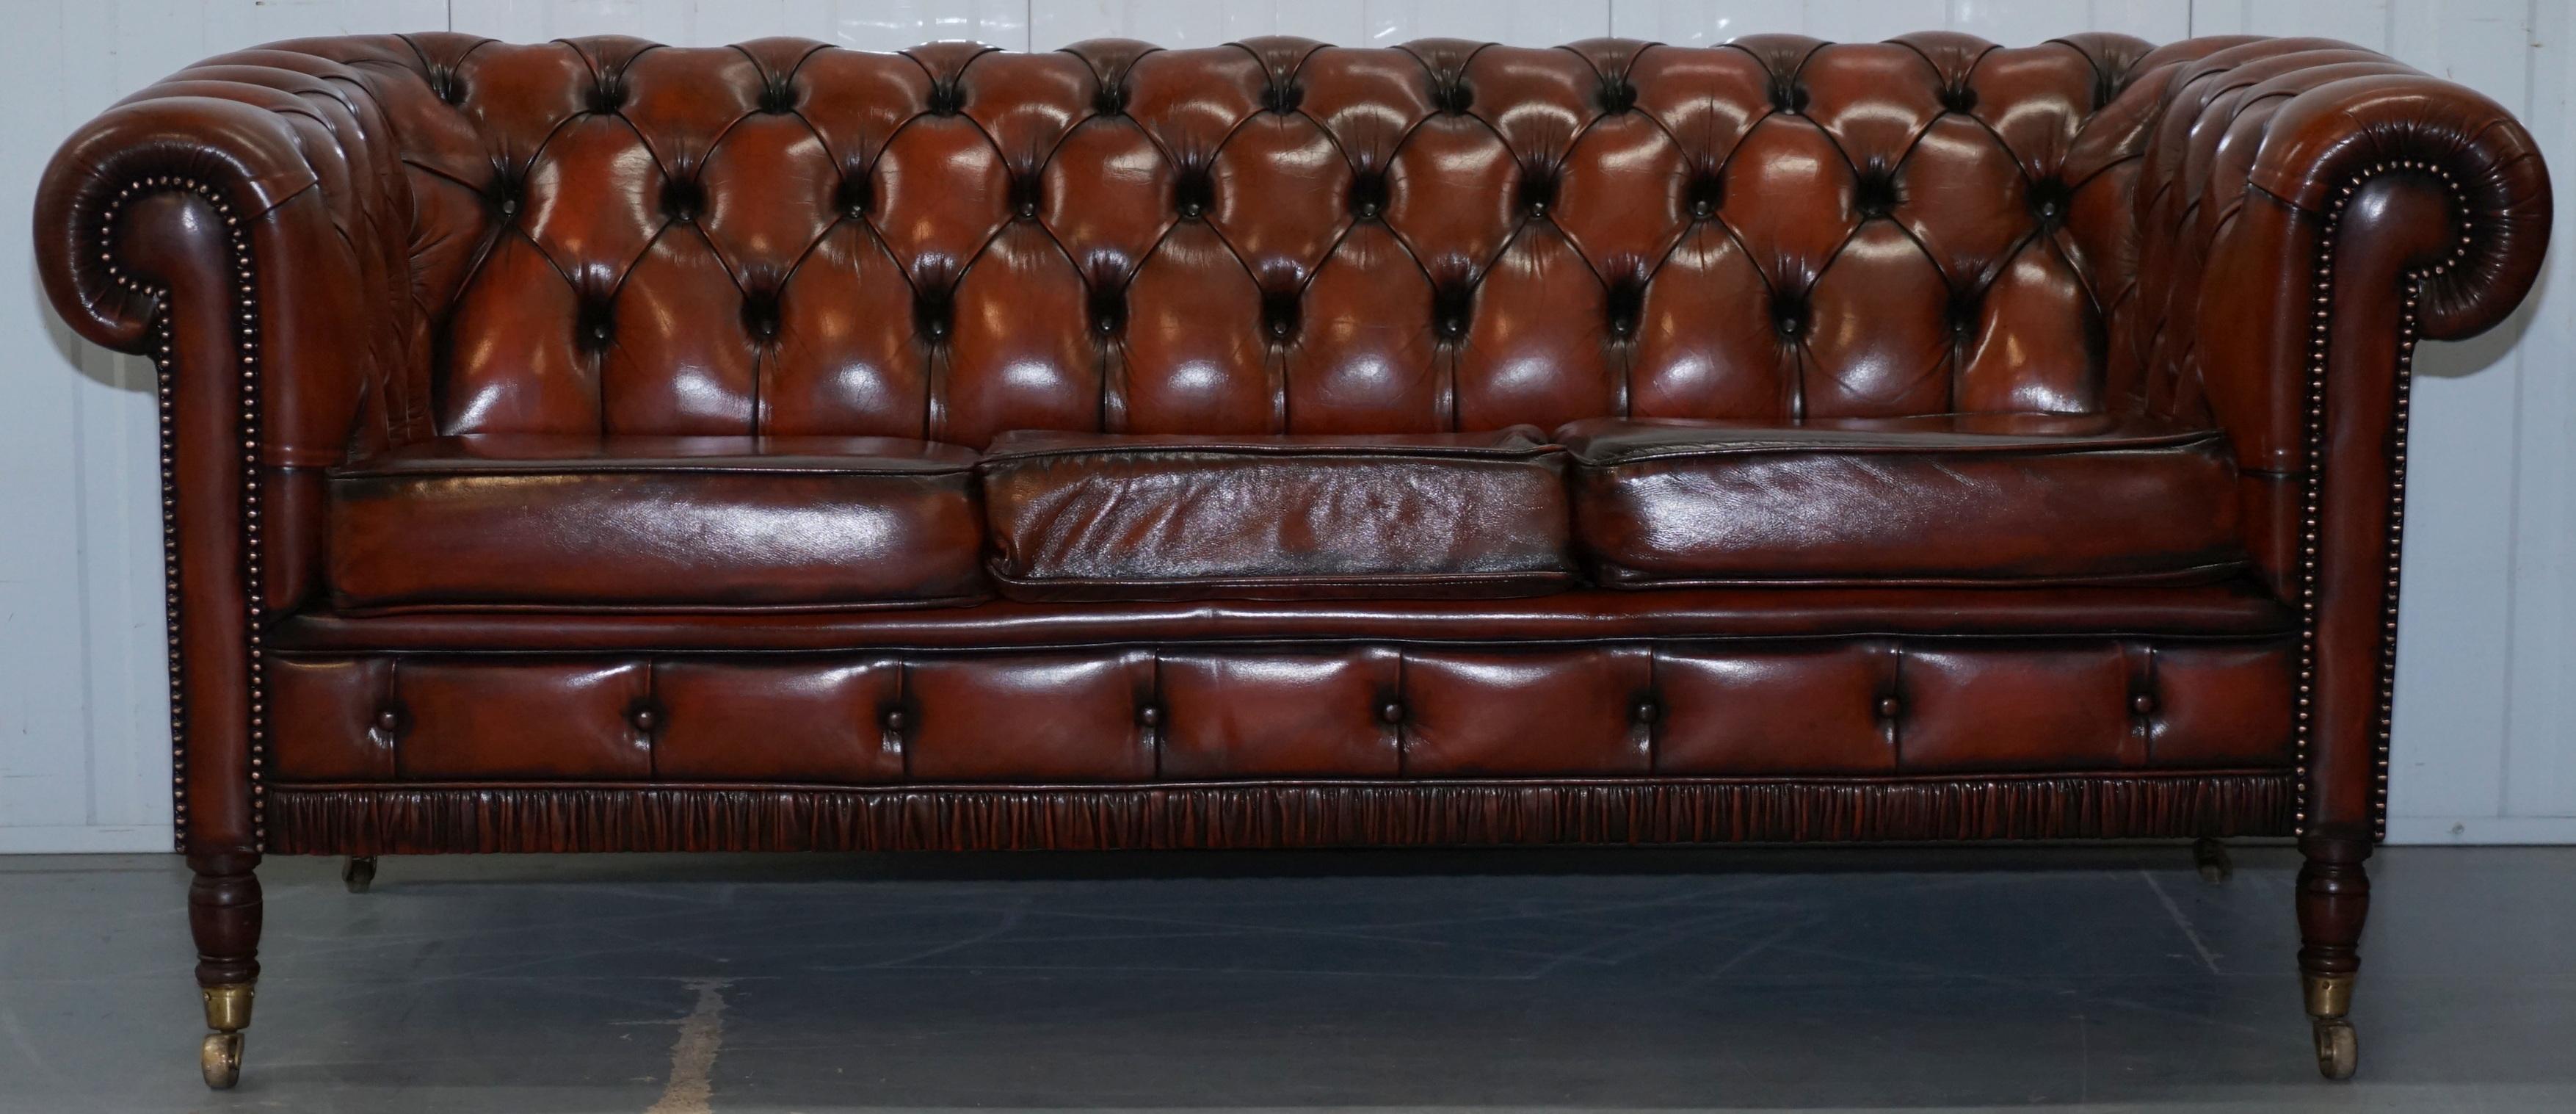 We are delighted to offer for sale this rare vintage circa 1960s Chesterfield fully restored Cigar brown leather club sofa 

I work with Luxury Chesterfield sofas and armchairs and have done for years, to find one with long elegant turned legs